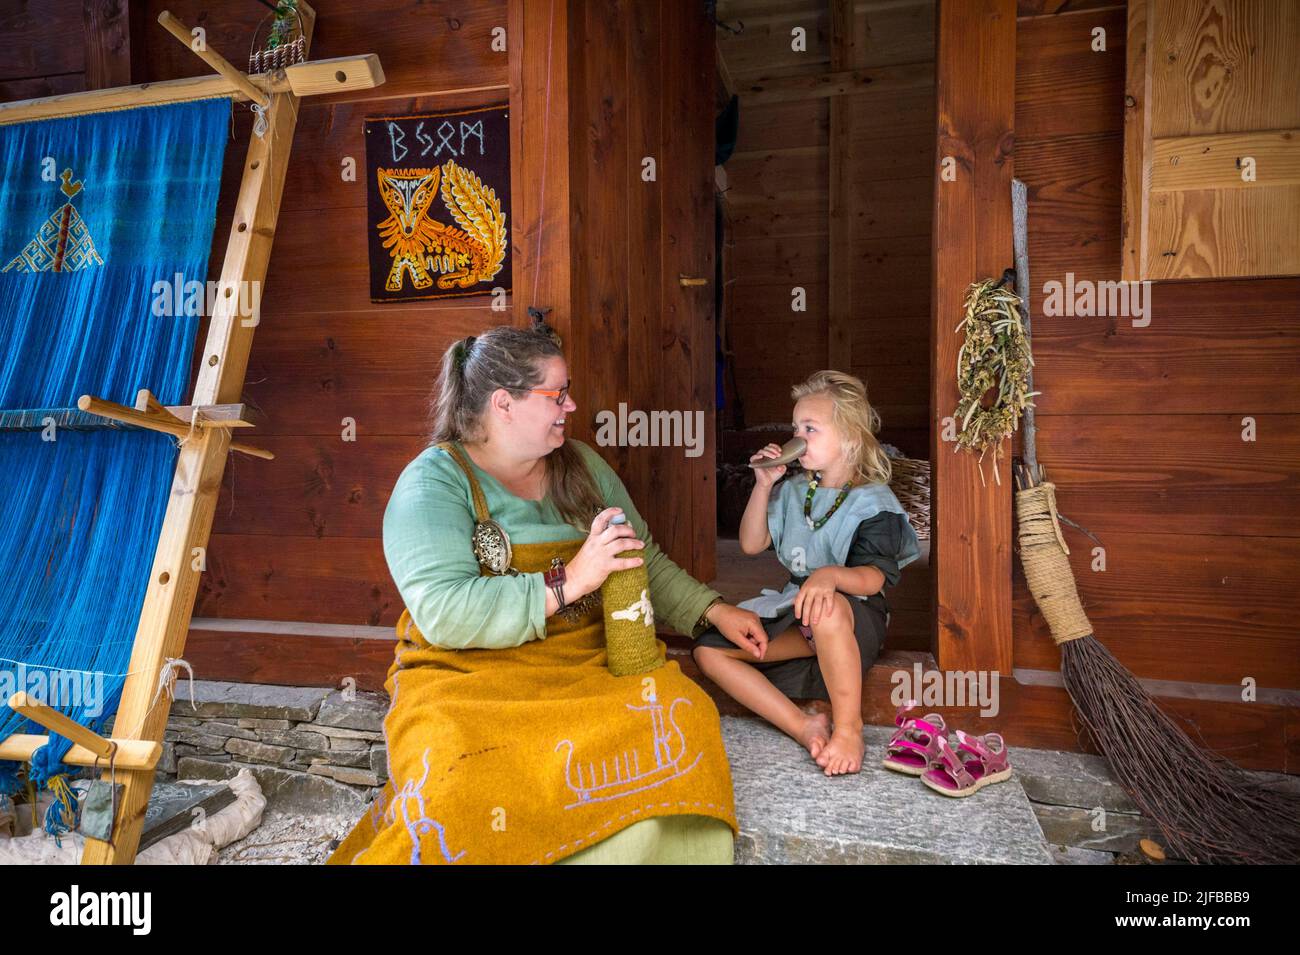 Norway, County of Vestland, Naeroyfjord, Aurland, Gudvangen, Viking village, a mother and her child quench their thirst in front of the traditional house which they occupy for a few months, even a few years, living in Viking fashion and passing on their know-how to visitors Stock Photo